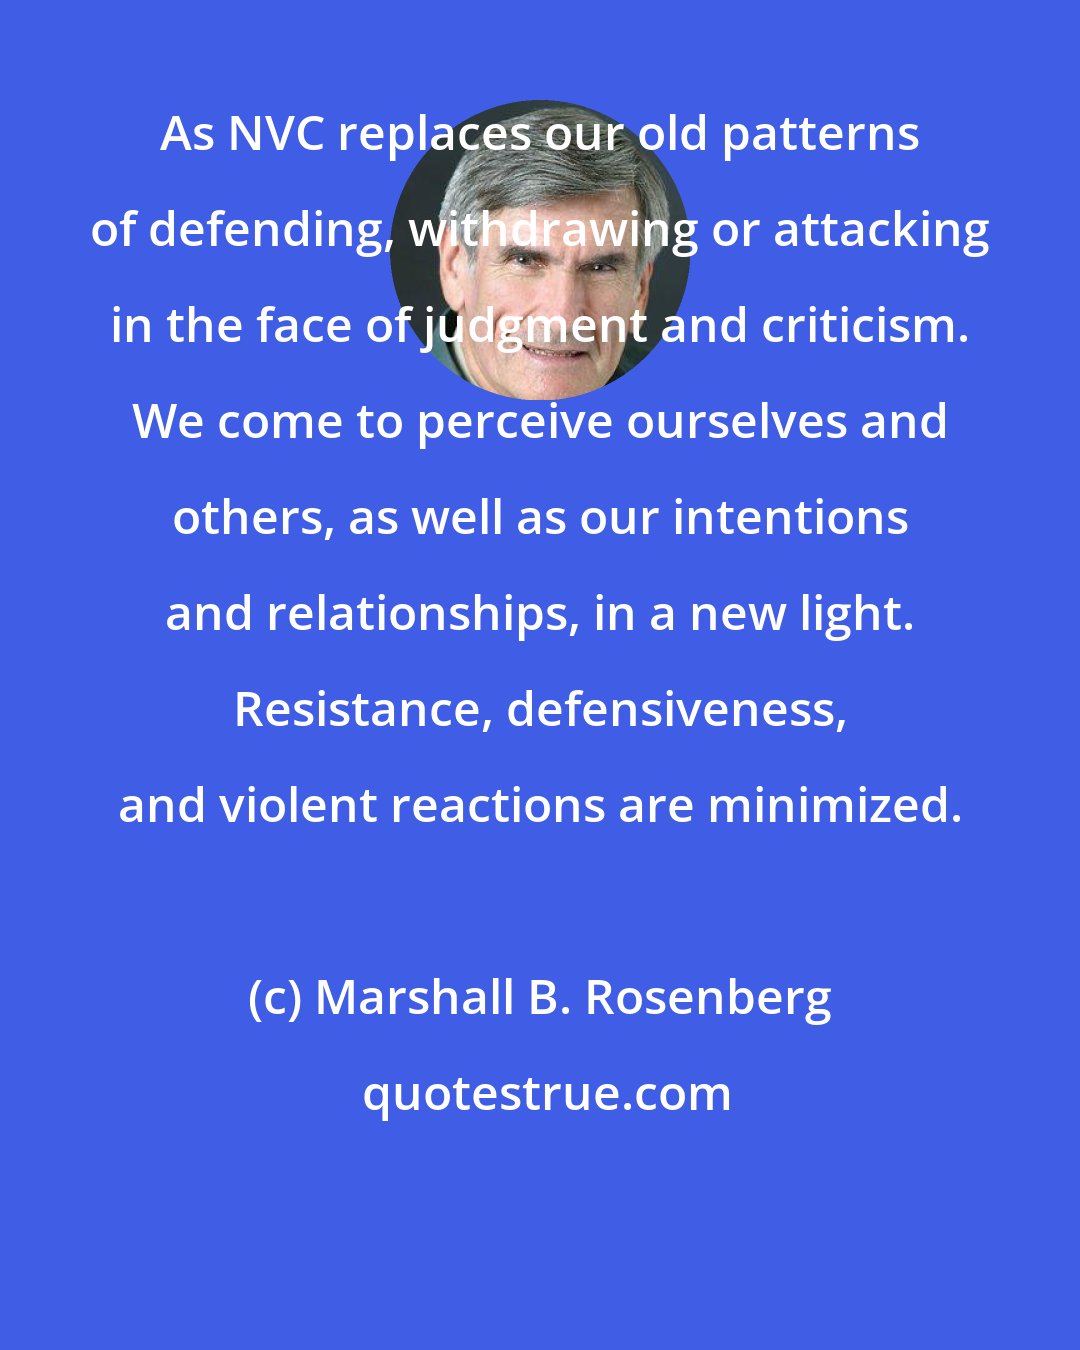 Marshall B. Rosenberg: As NVC replaces our old patterns of defending, withdrawing or attacking in the face of judgment and criticism. We come to perceive ourselves and others, as well as our intentions and relationships, in a new light. Resistance, defensiveness, and violent reactions are minimized.